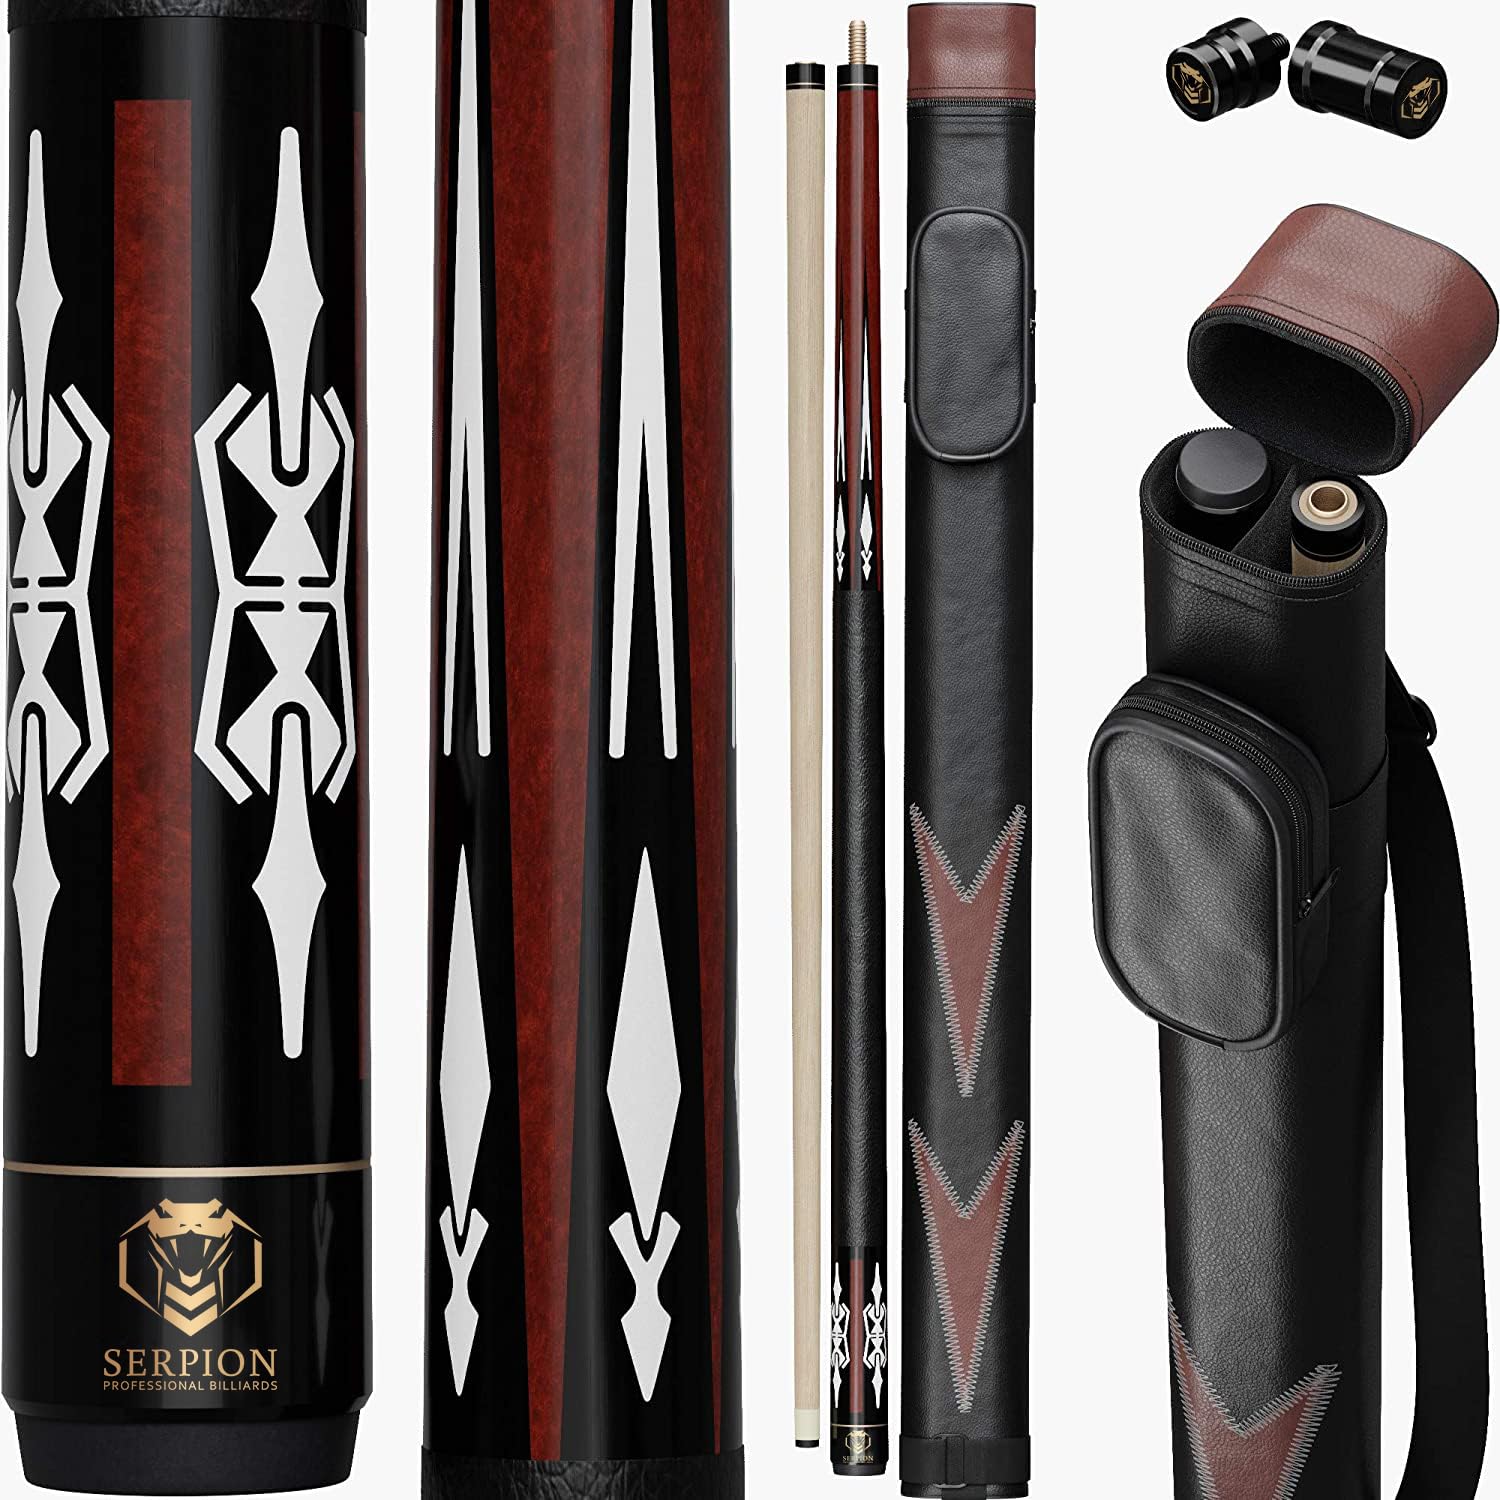 Serpion - Pool Cue Stick 100% Canadian Maple Wood. Professional Billiard Pool Cue Stick with Hard Case and Joint Protectors